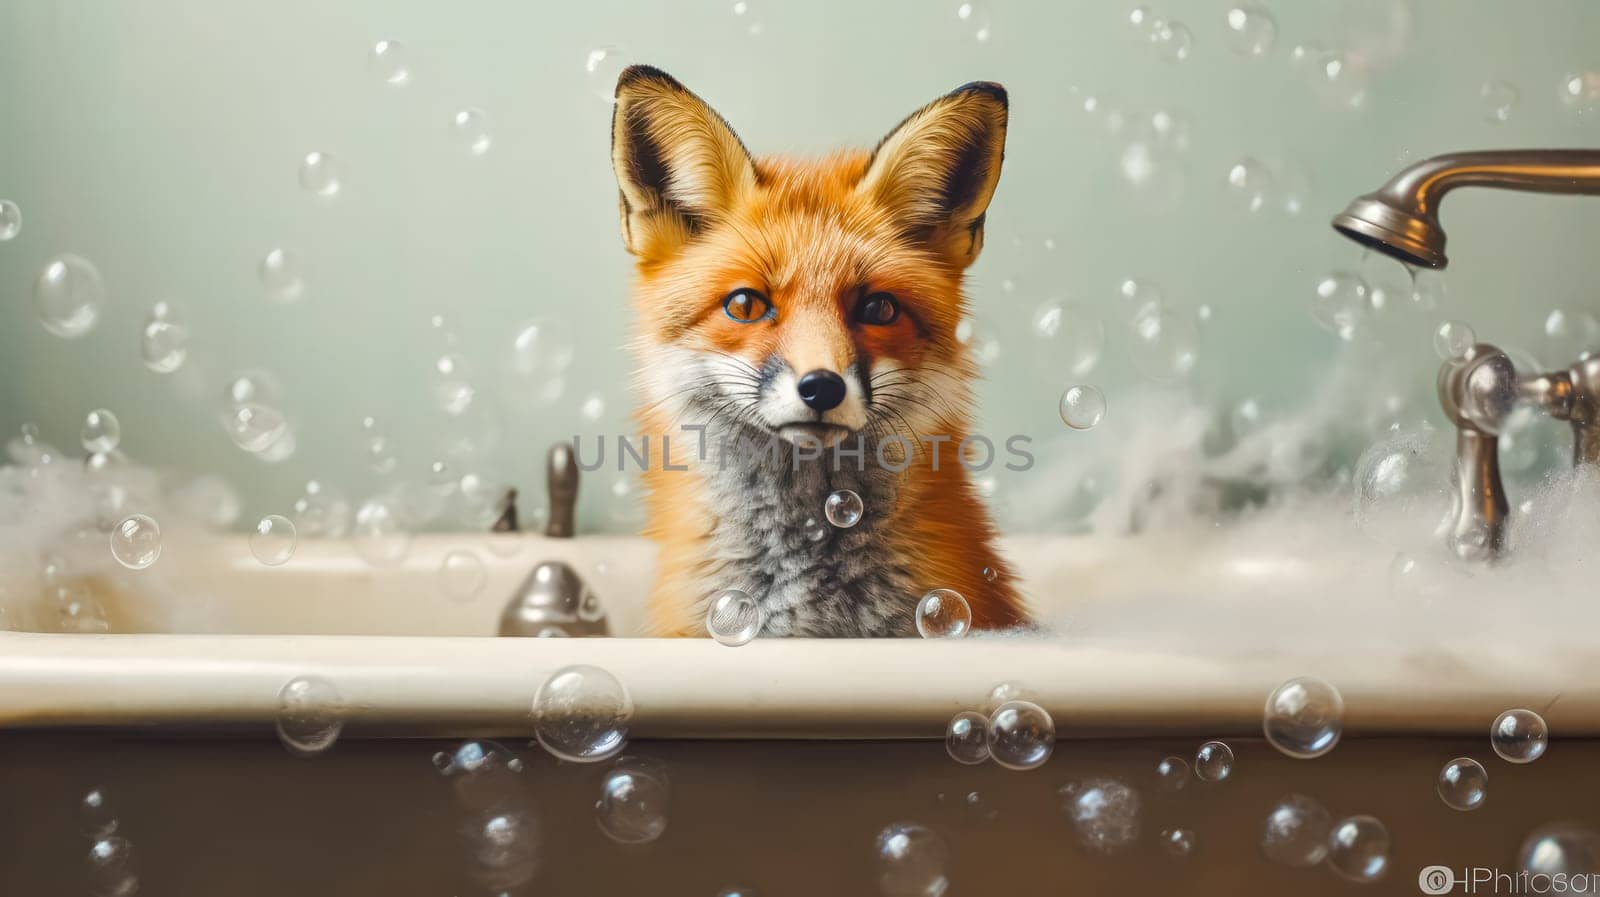 A delightful fox lounges in a bathtub surrounded by frothy soap bubbles, creating a charming and whimsical scene against a soft background.